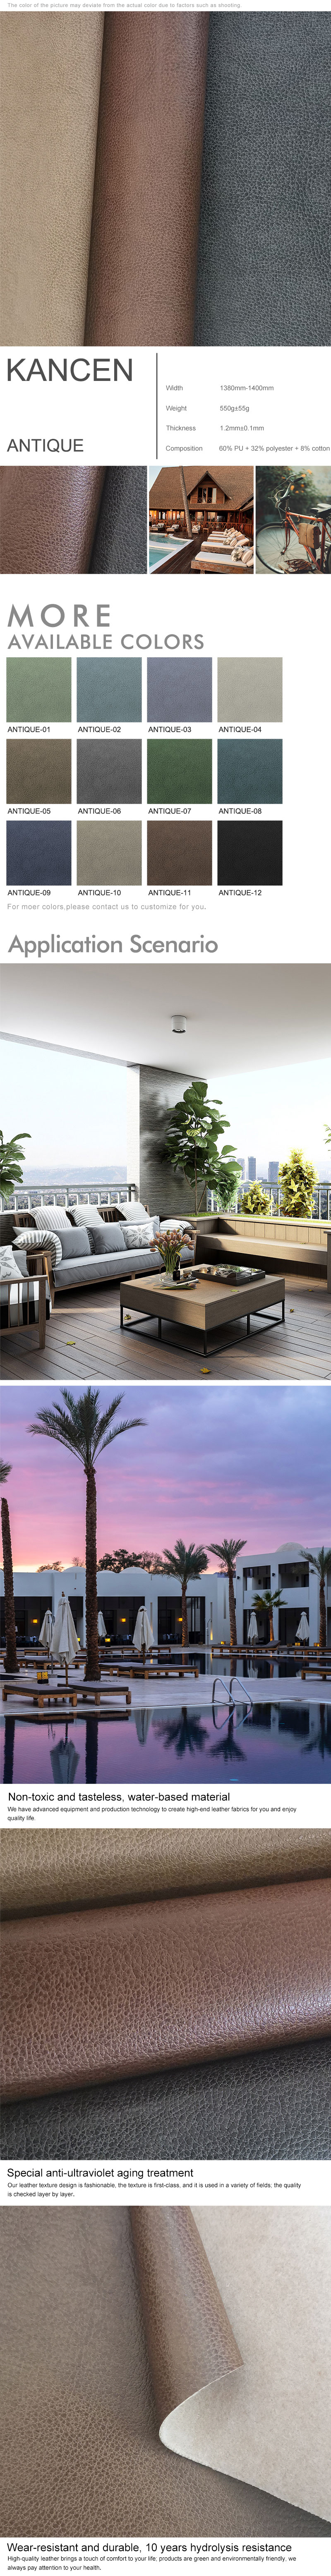 1380mm wide outdoor furniture leather | outdoor leather | leather - KANCEN